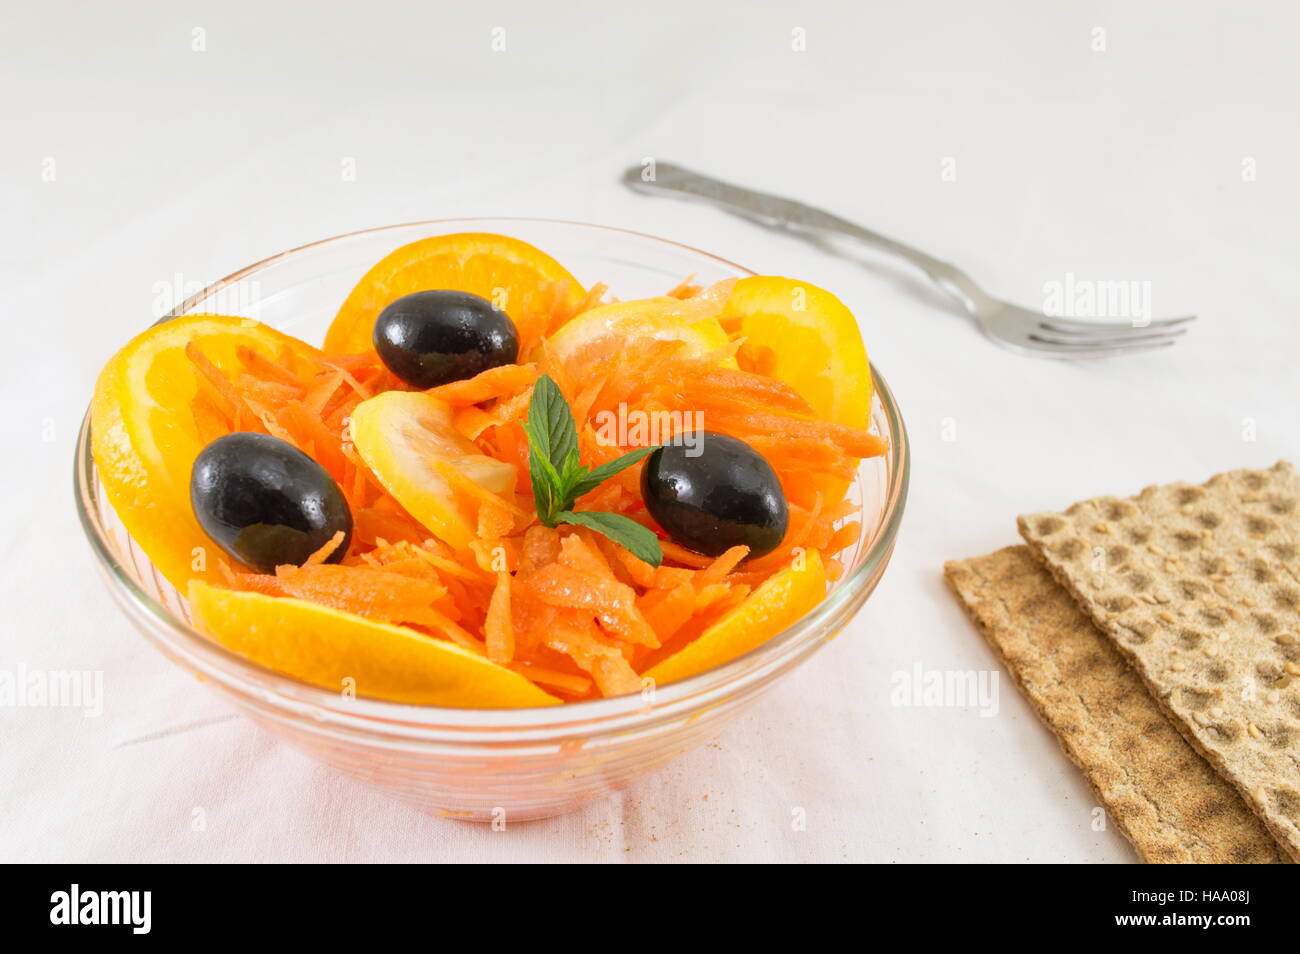 orange, carrot and olive salad with integral biscuits Stock Photo